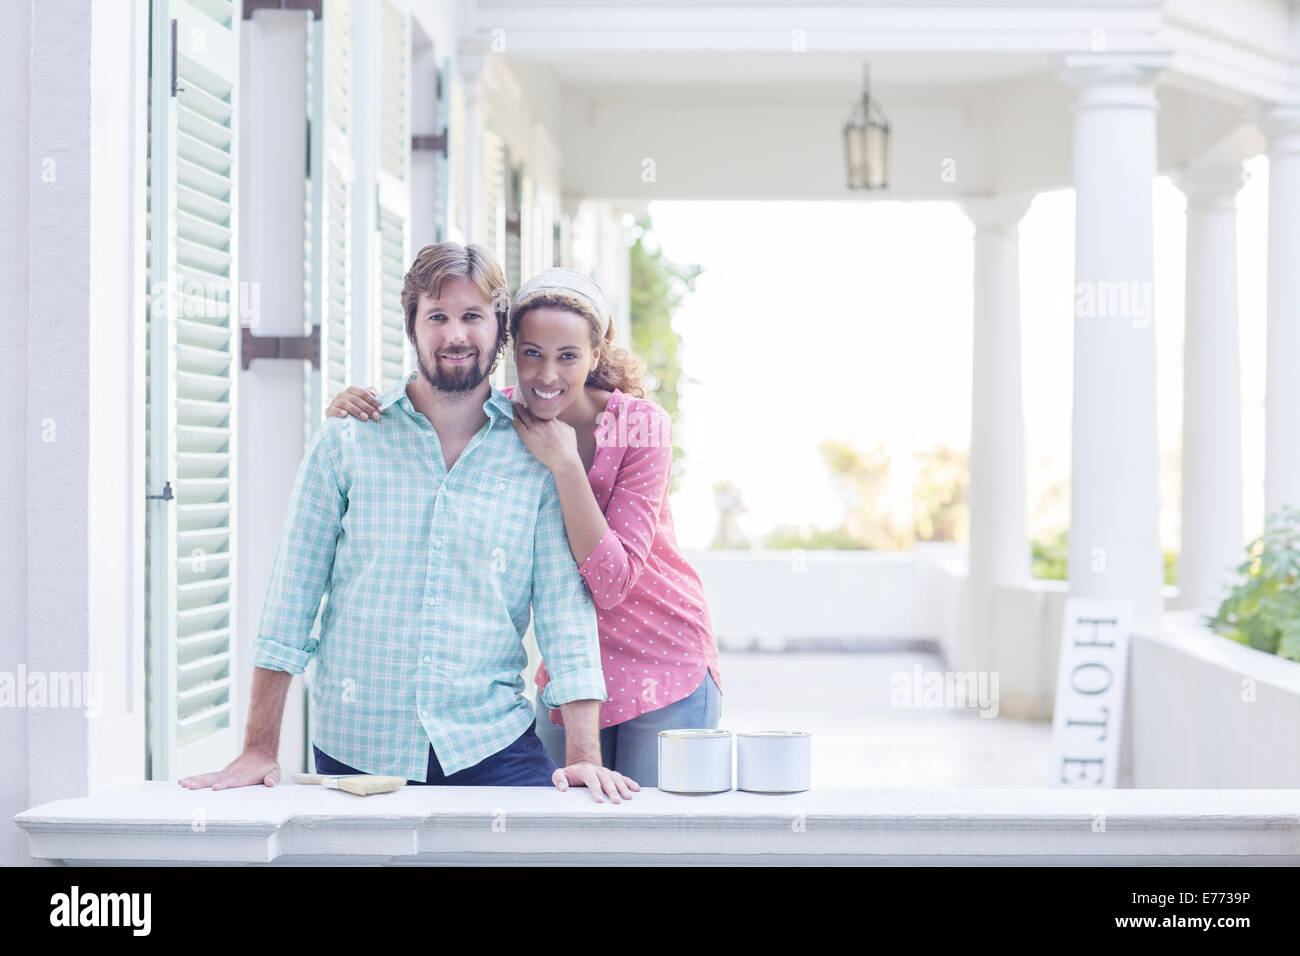 Couple hugging on porch Banque D'Images